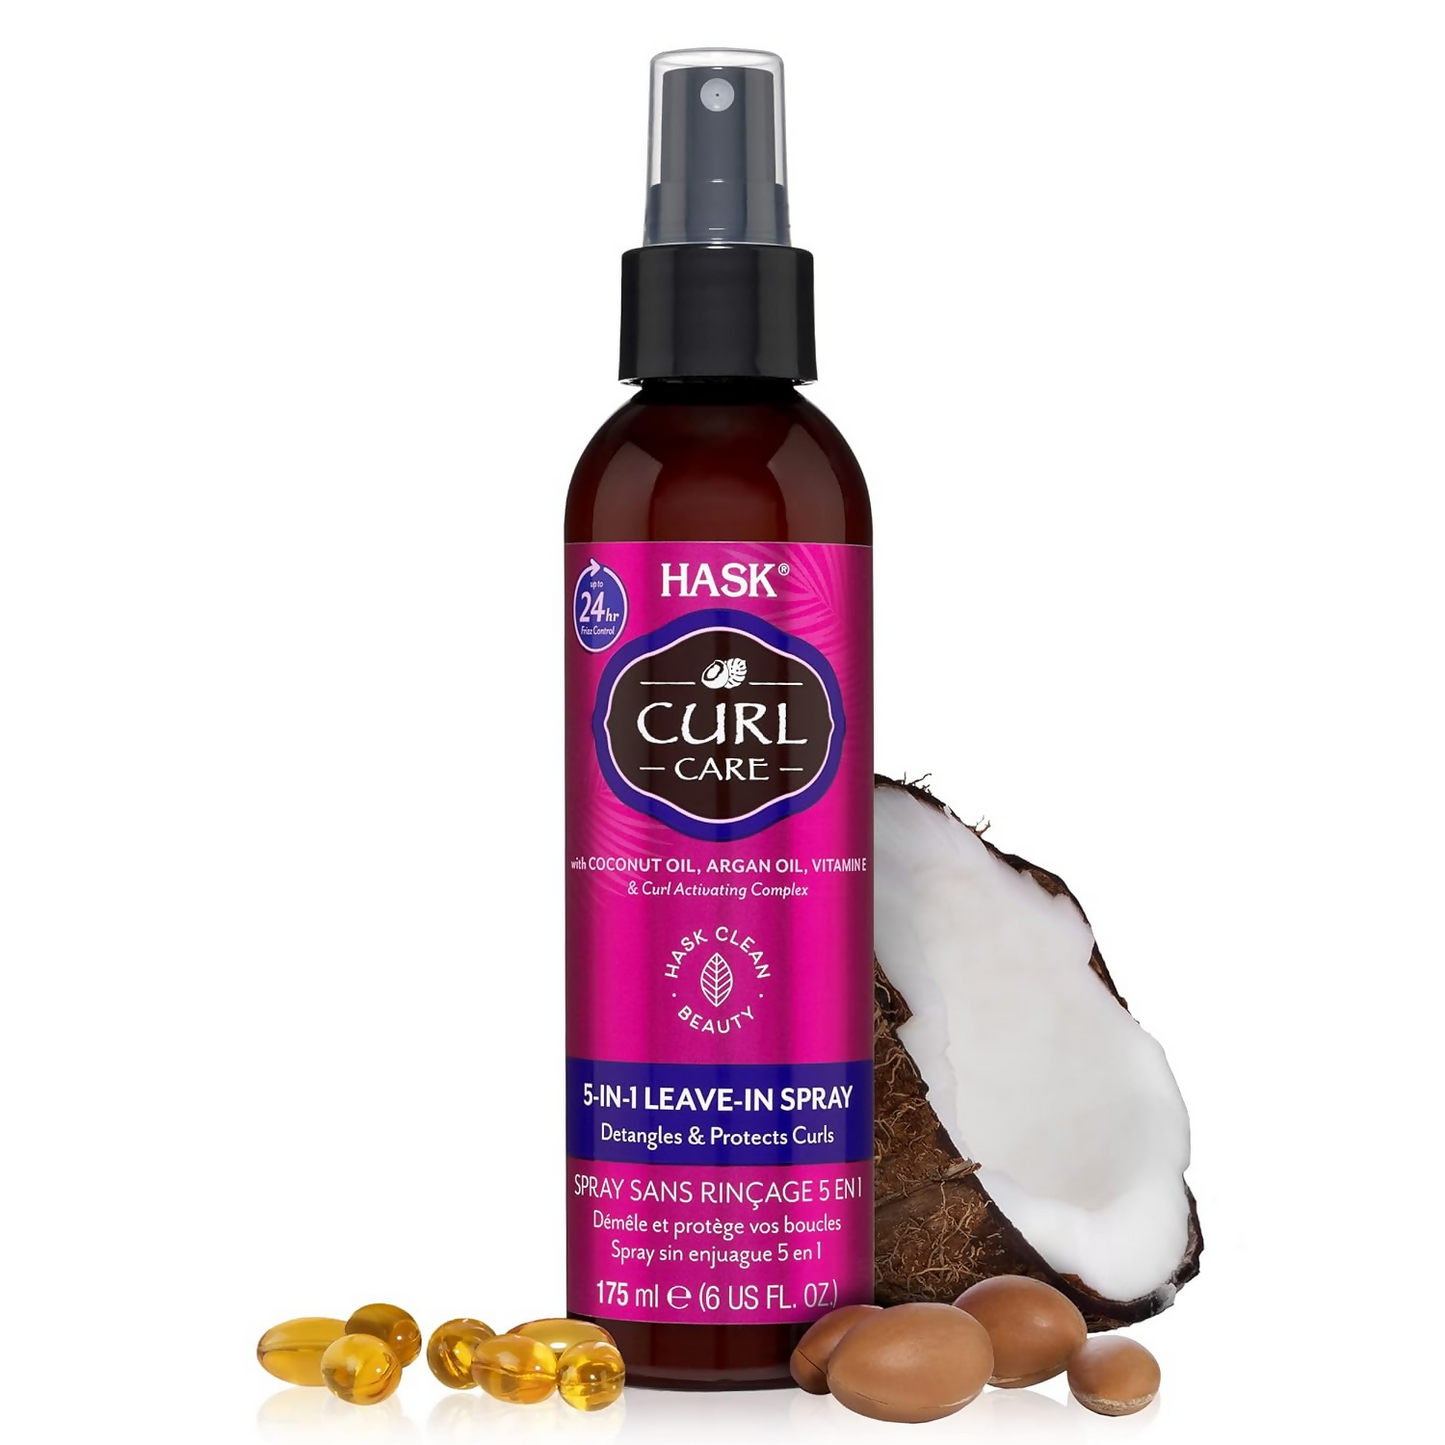 HASK Curl Care 5-In-1 Leave In Spray